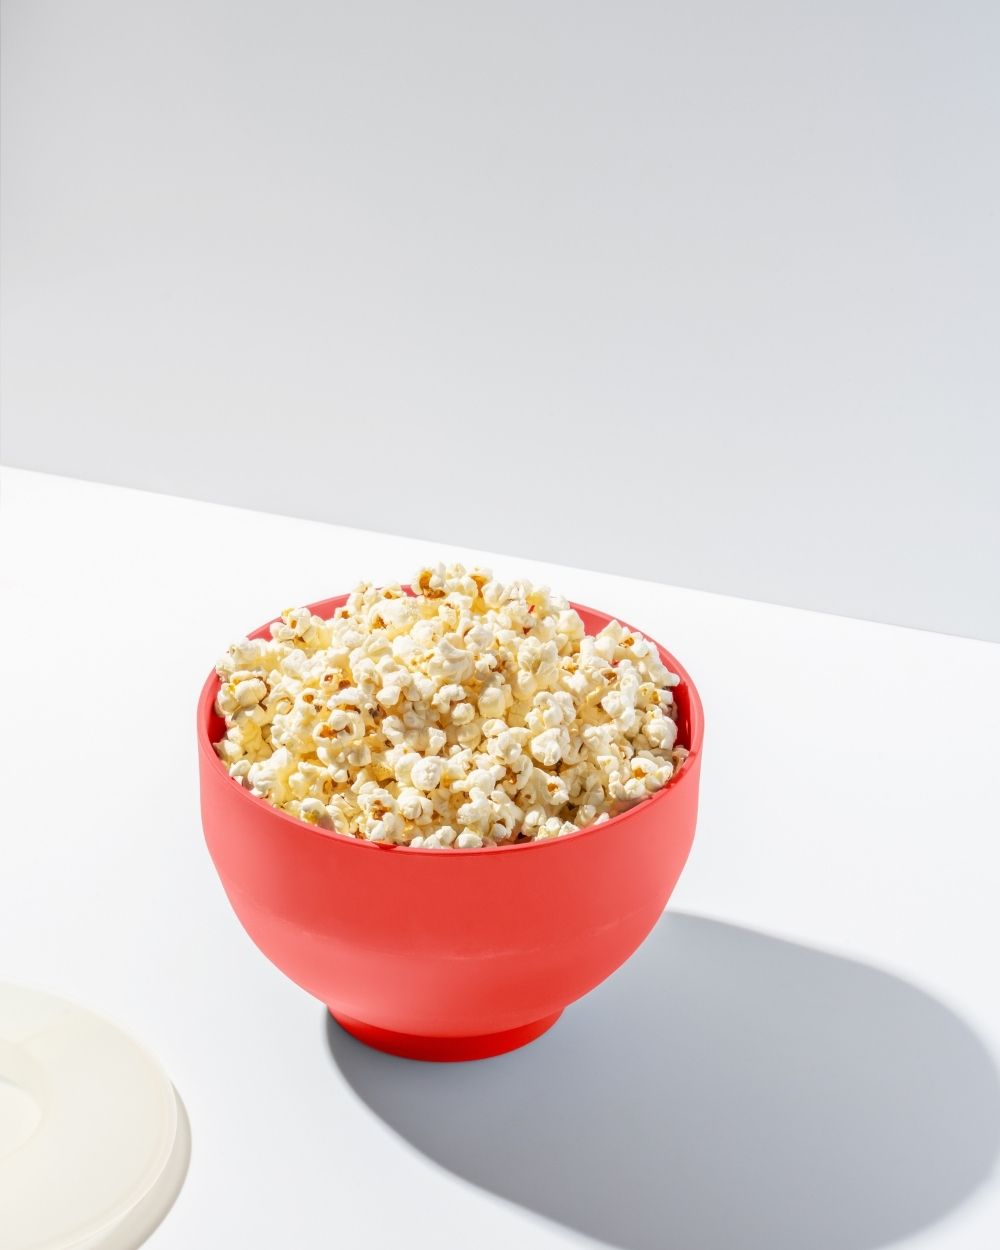 Reusable Silicone Microwave Air-Popper for Popcorn - W&P